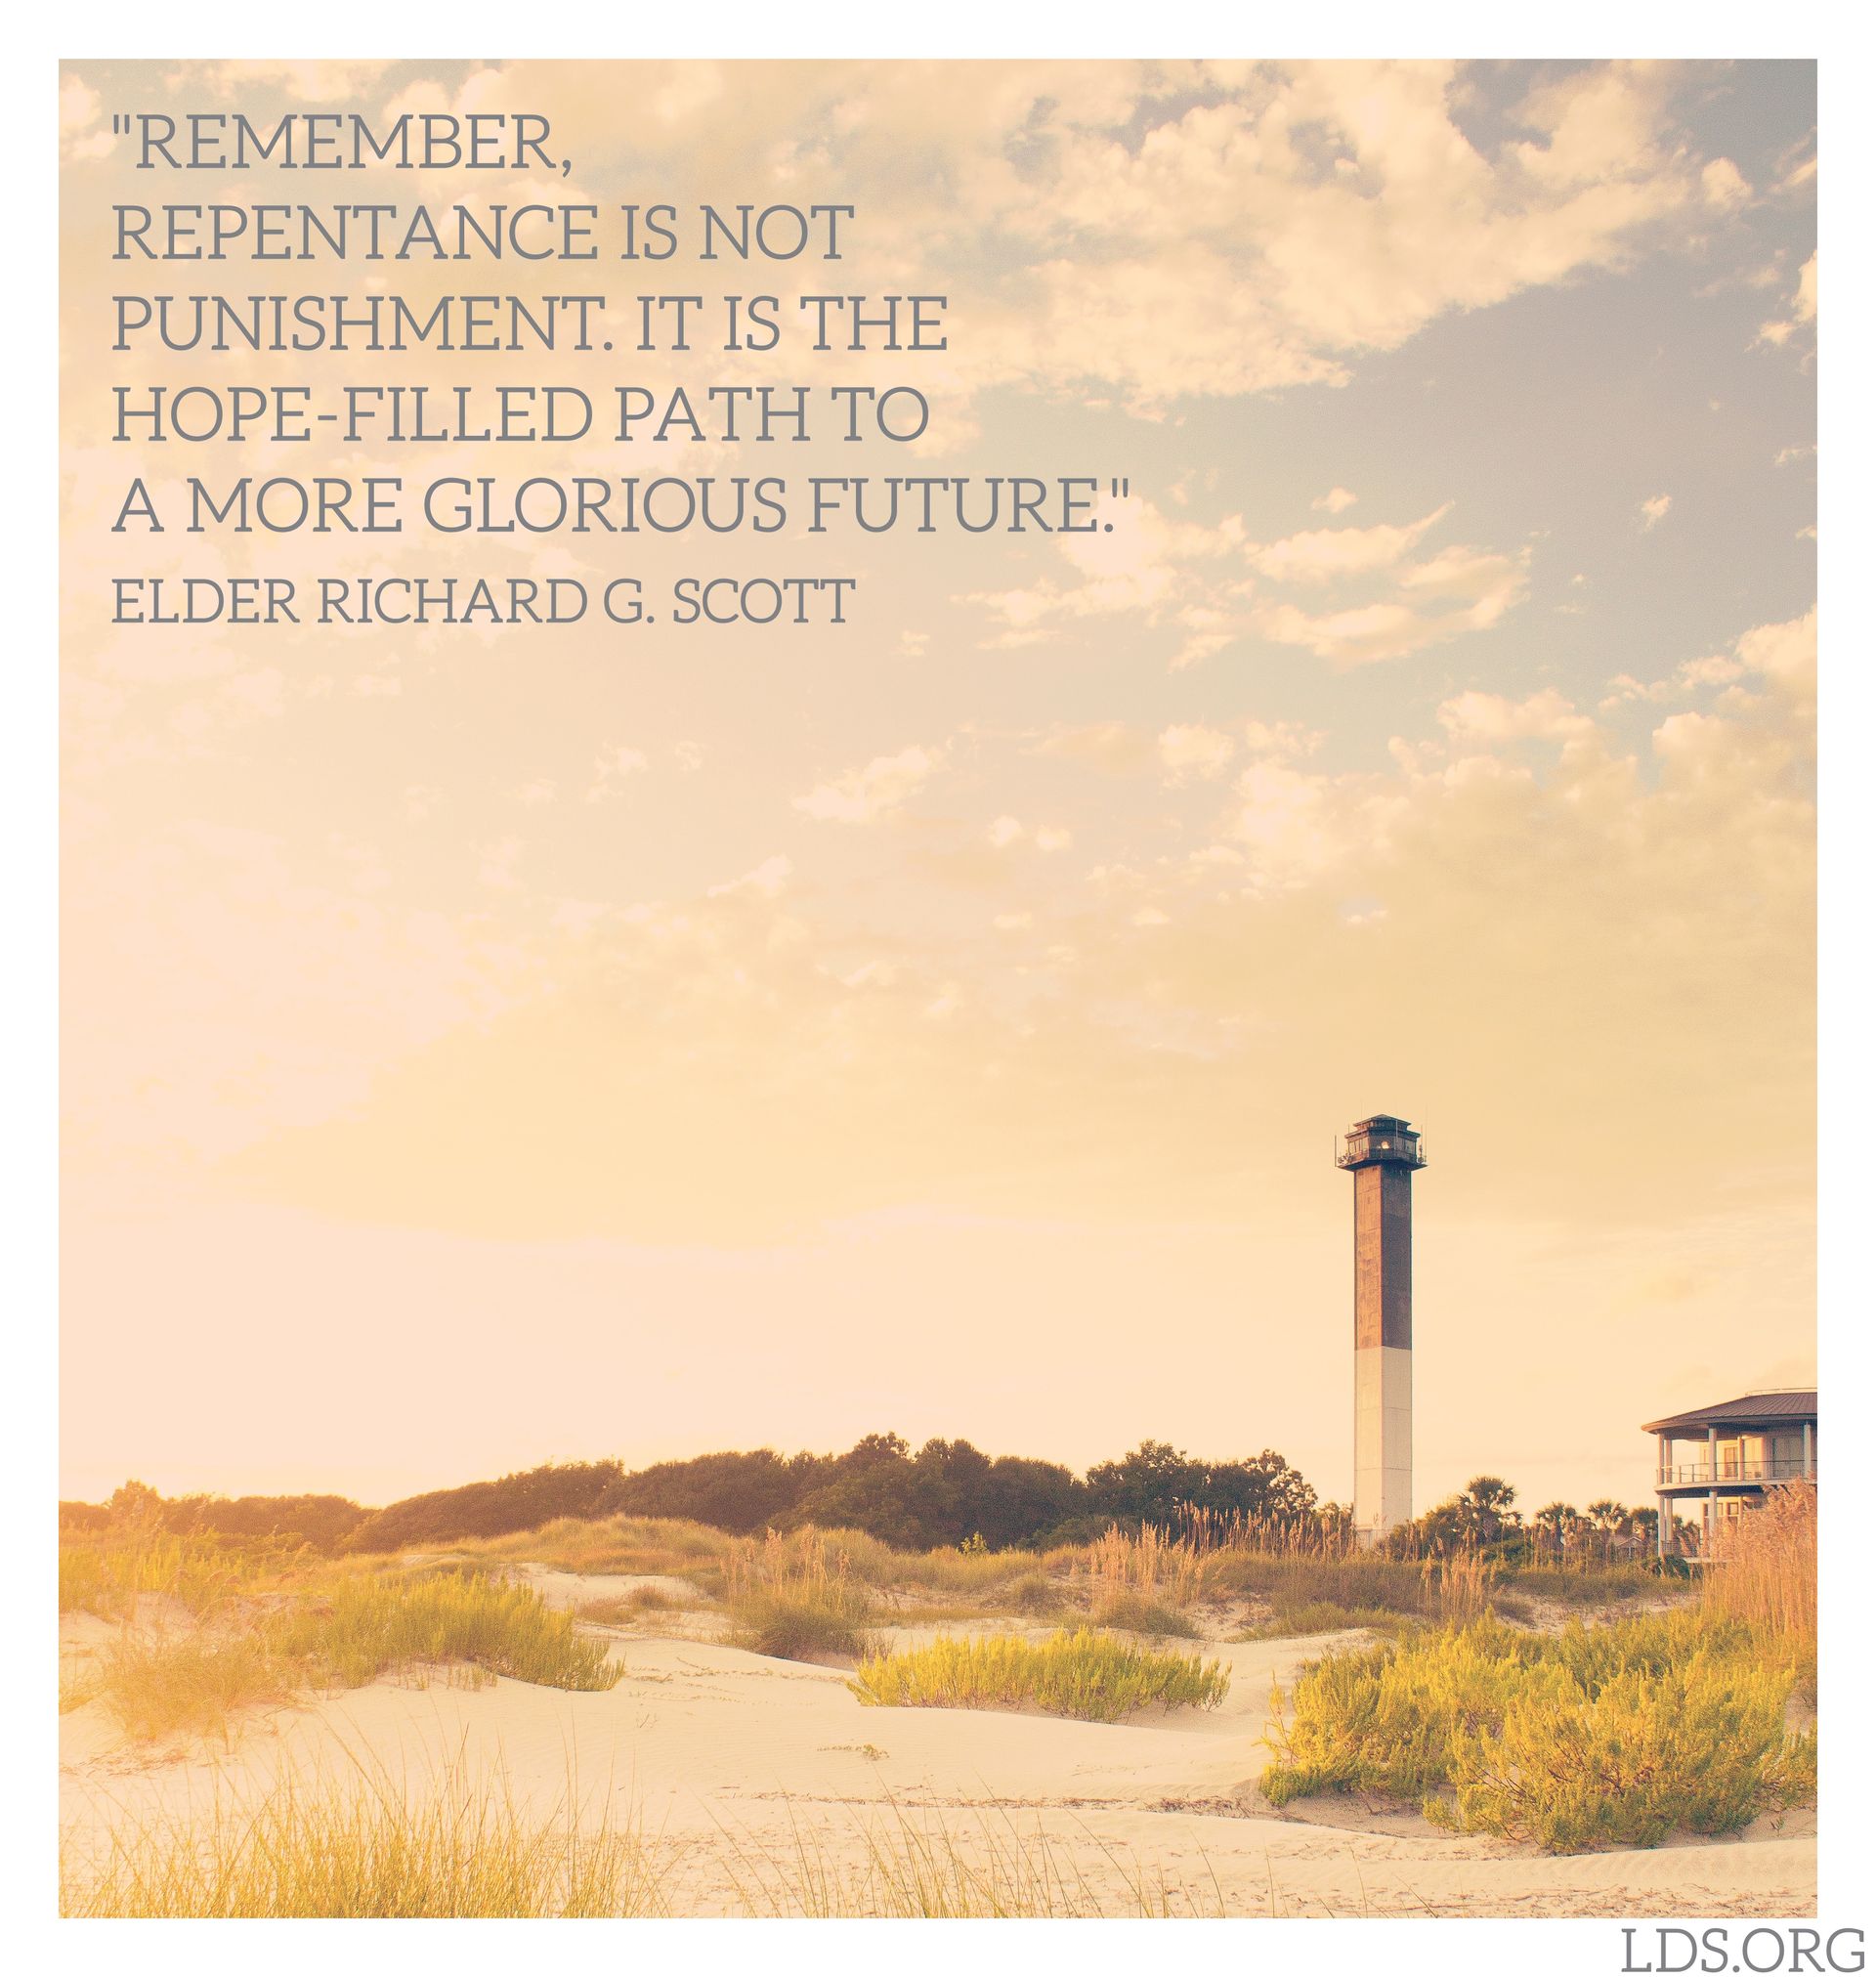 “Remember, repentance is not punishment. It is the hope-filled path to a more glorious future.”—Elder Richard G. Scott, “Personal Strength through the Atonement of Jesus Christ” © undefined ipCode 1.